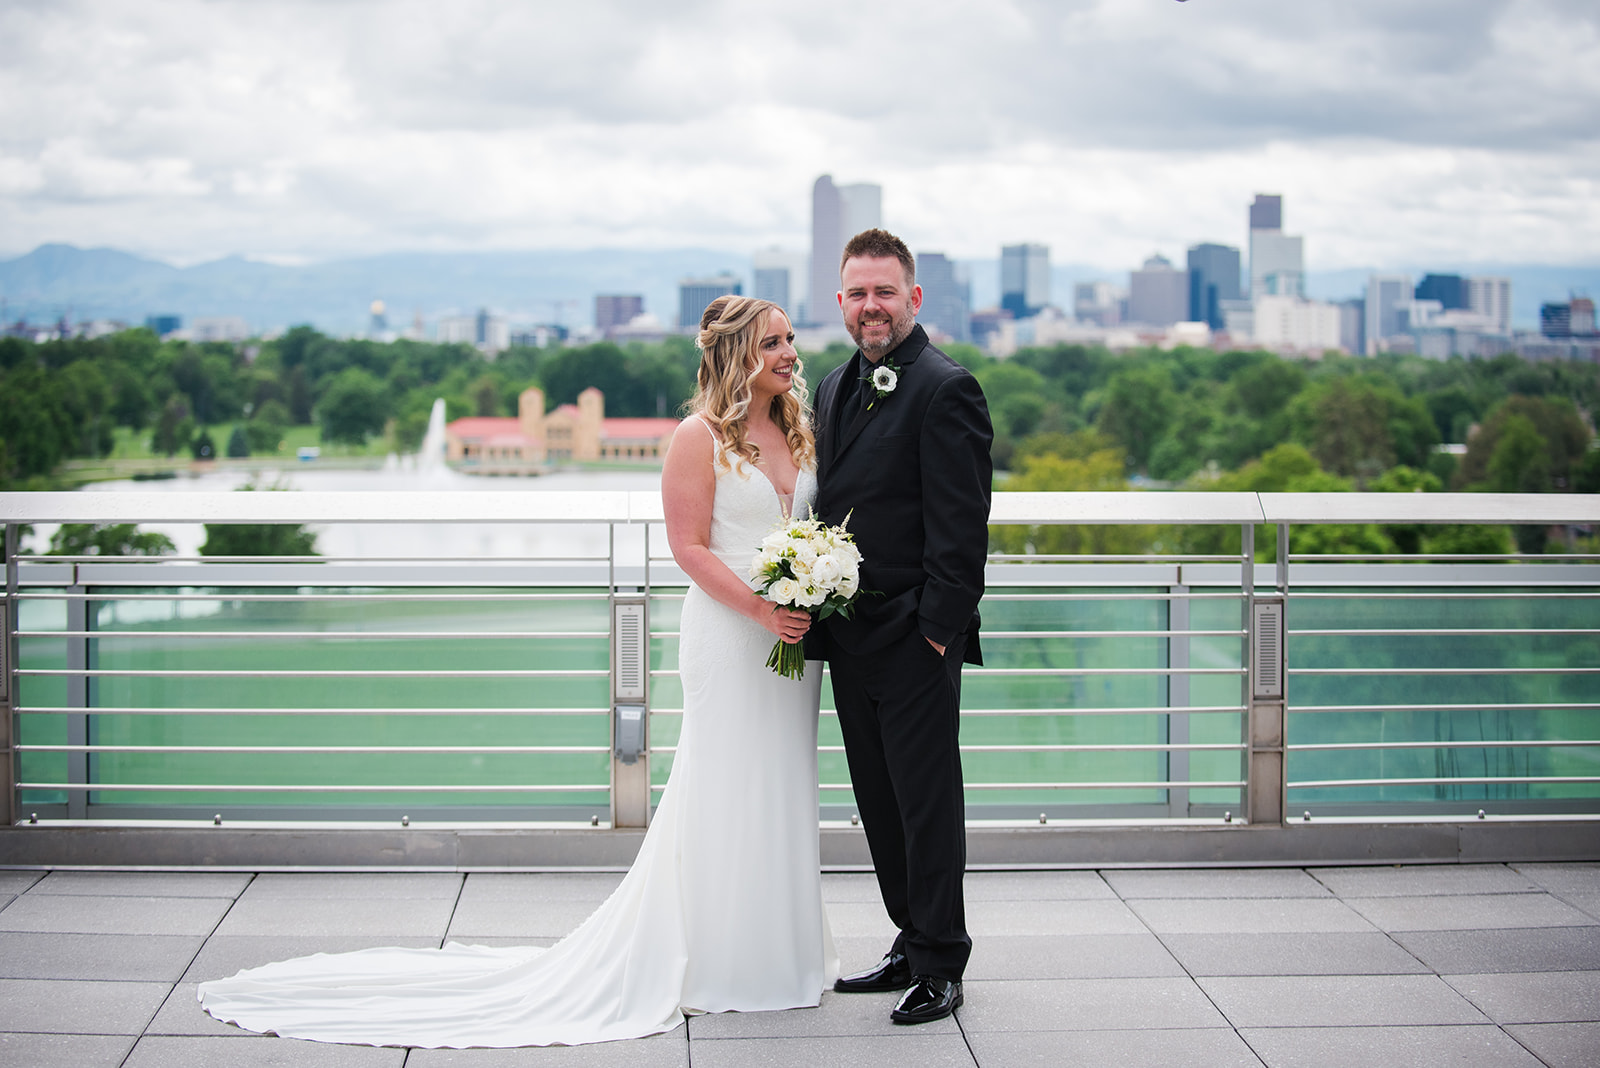 Groom smiles at the camera as bride looks up at him with Denver city skyline in the background.